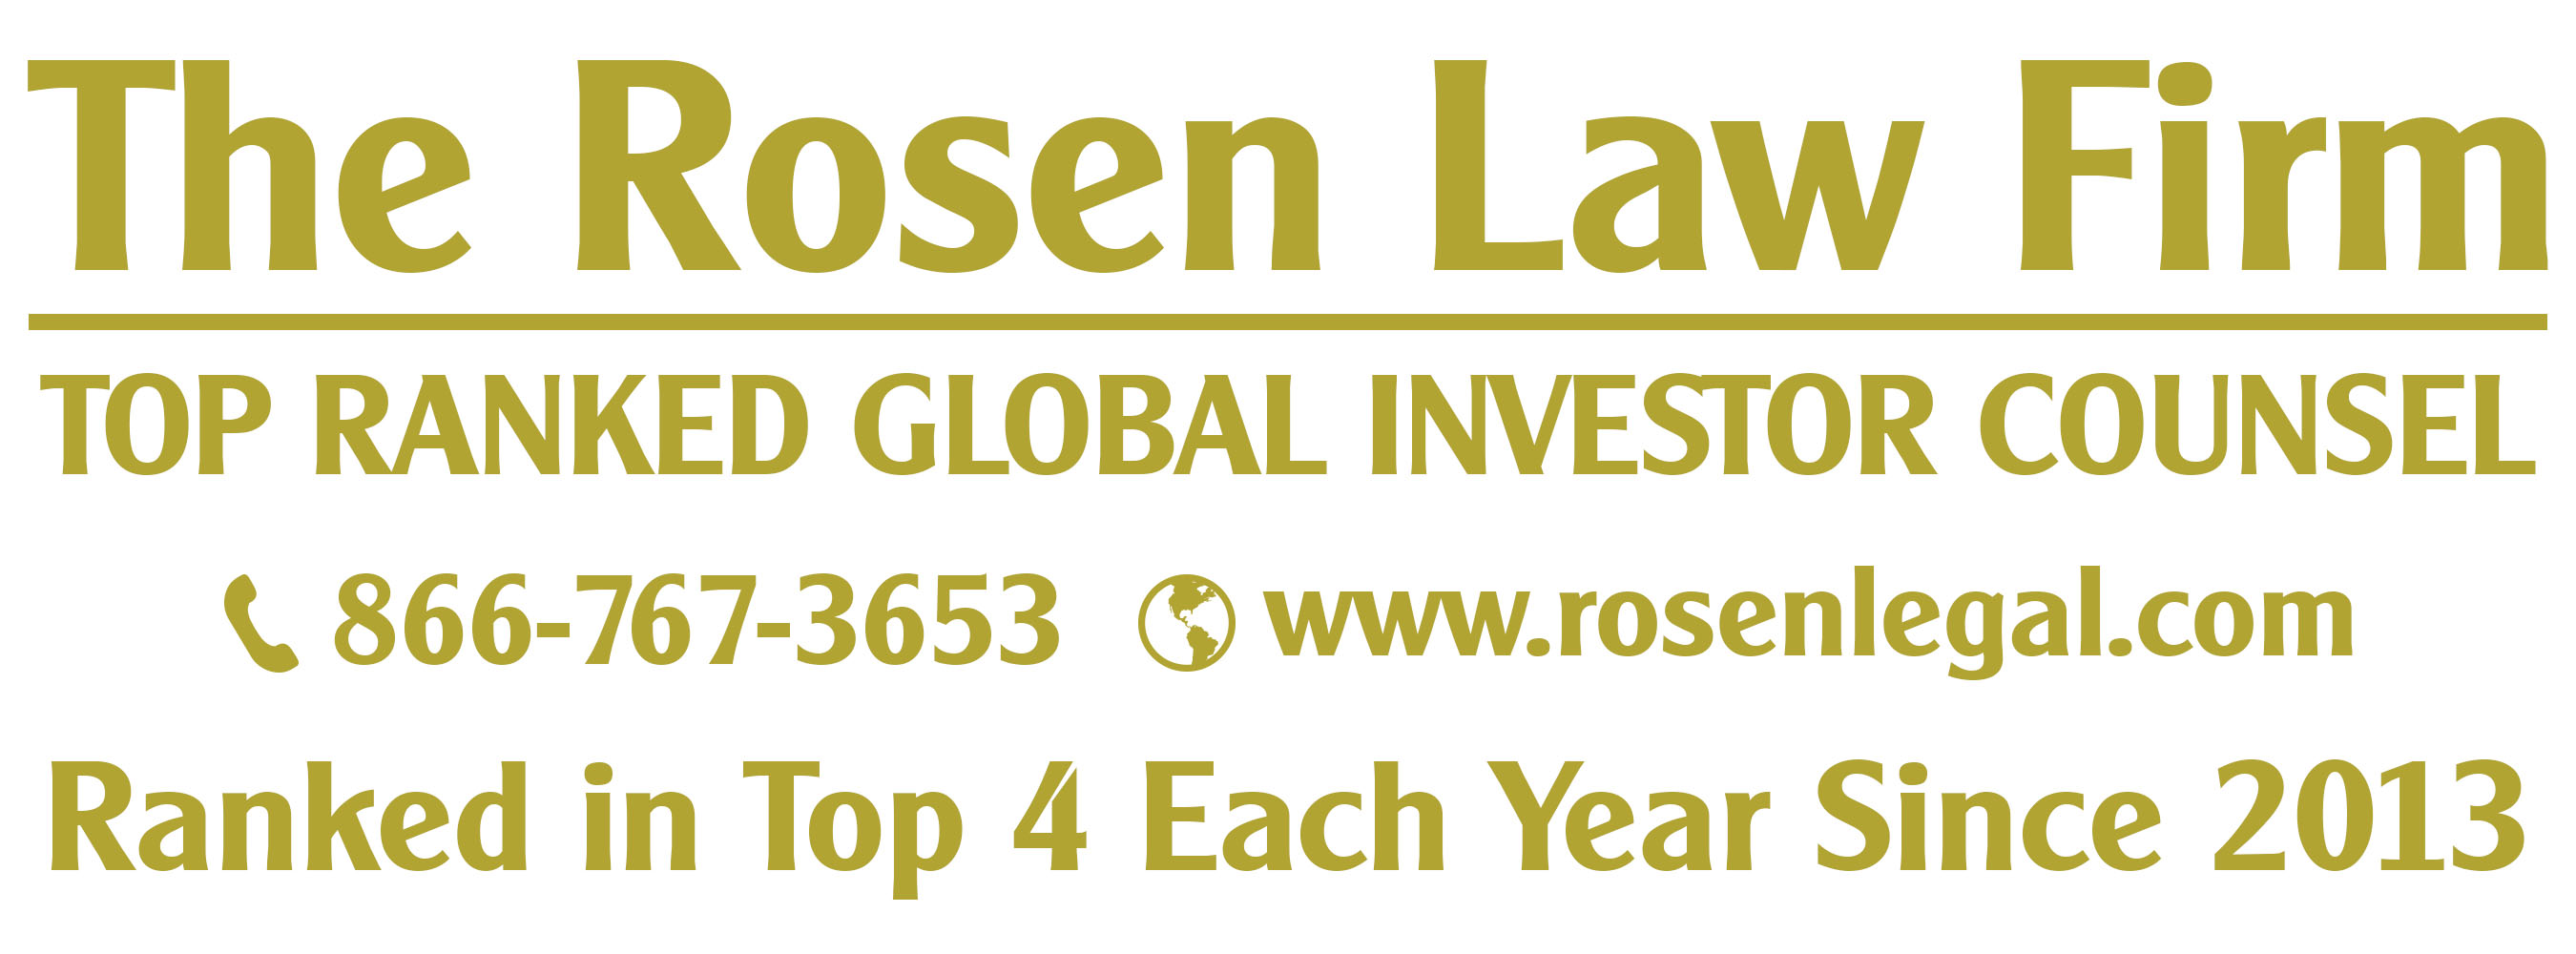 ROSEN, TRUSTED INVESTOR COUNSEL, Encourages Texas Capital